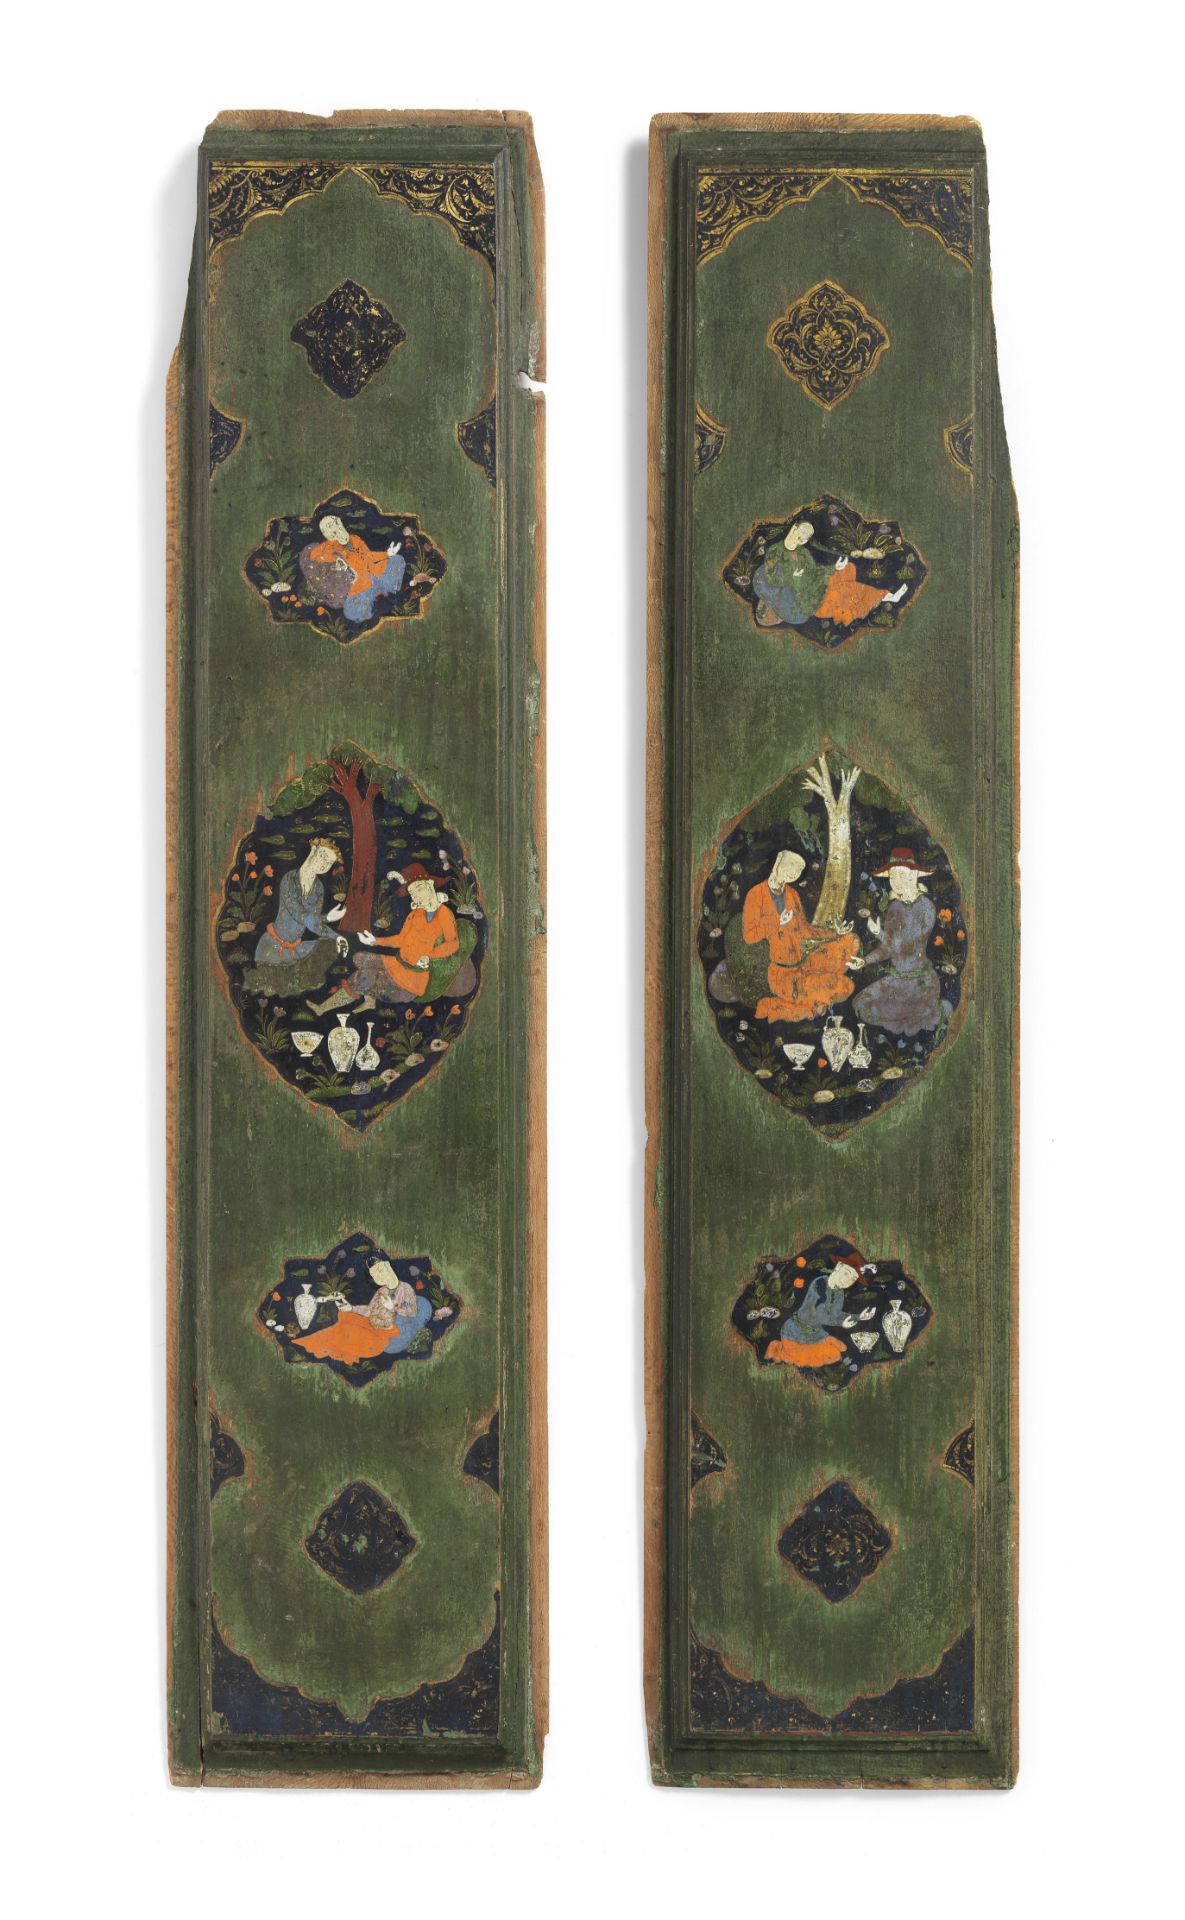 Two large Safavid painted and lacquered wood panels Persia, second quarter of the 17th Century(2)